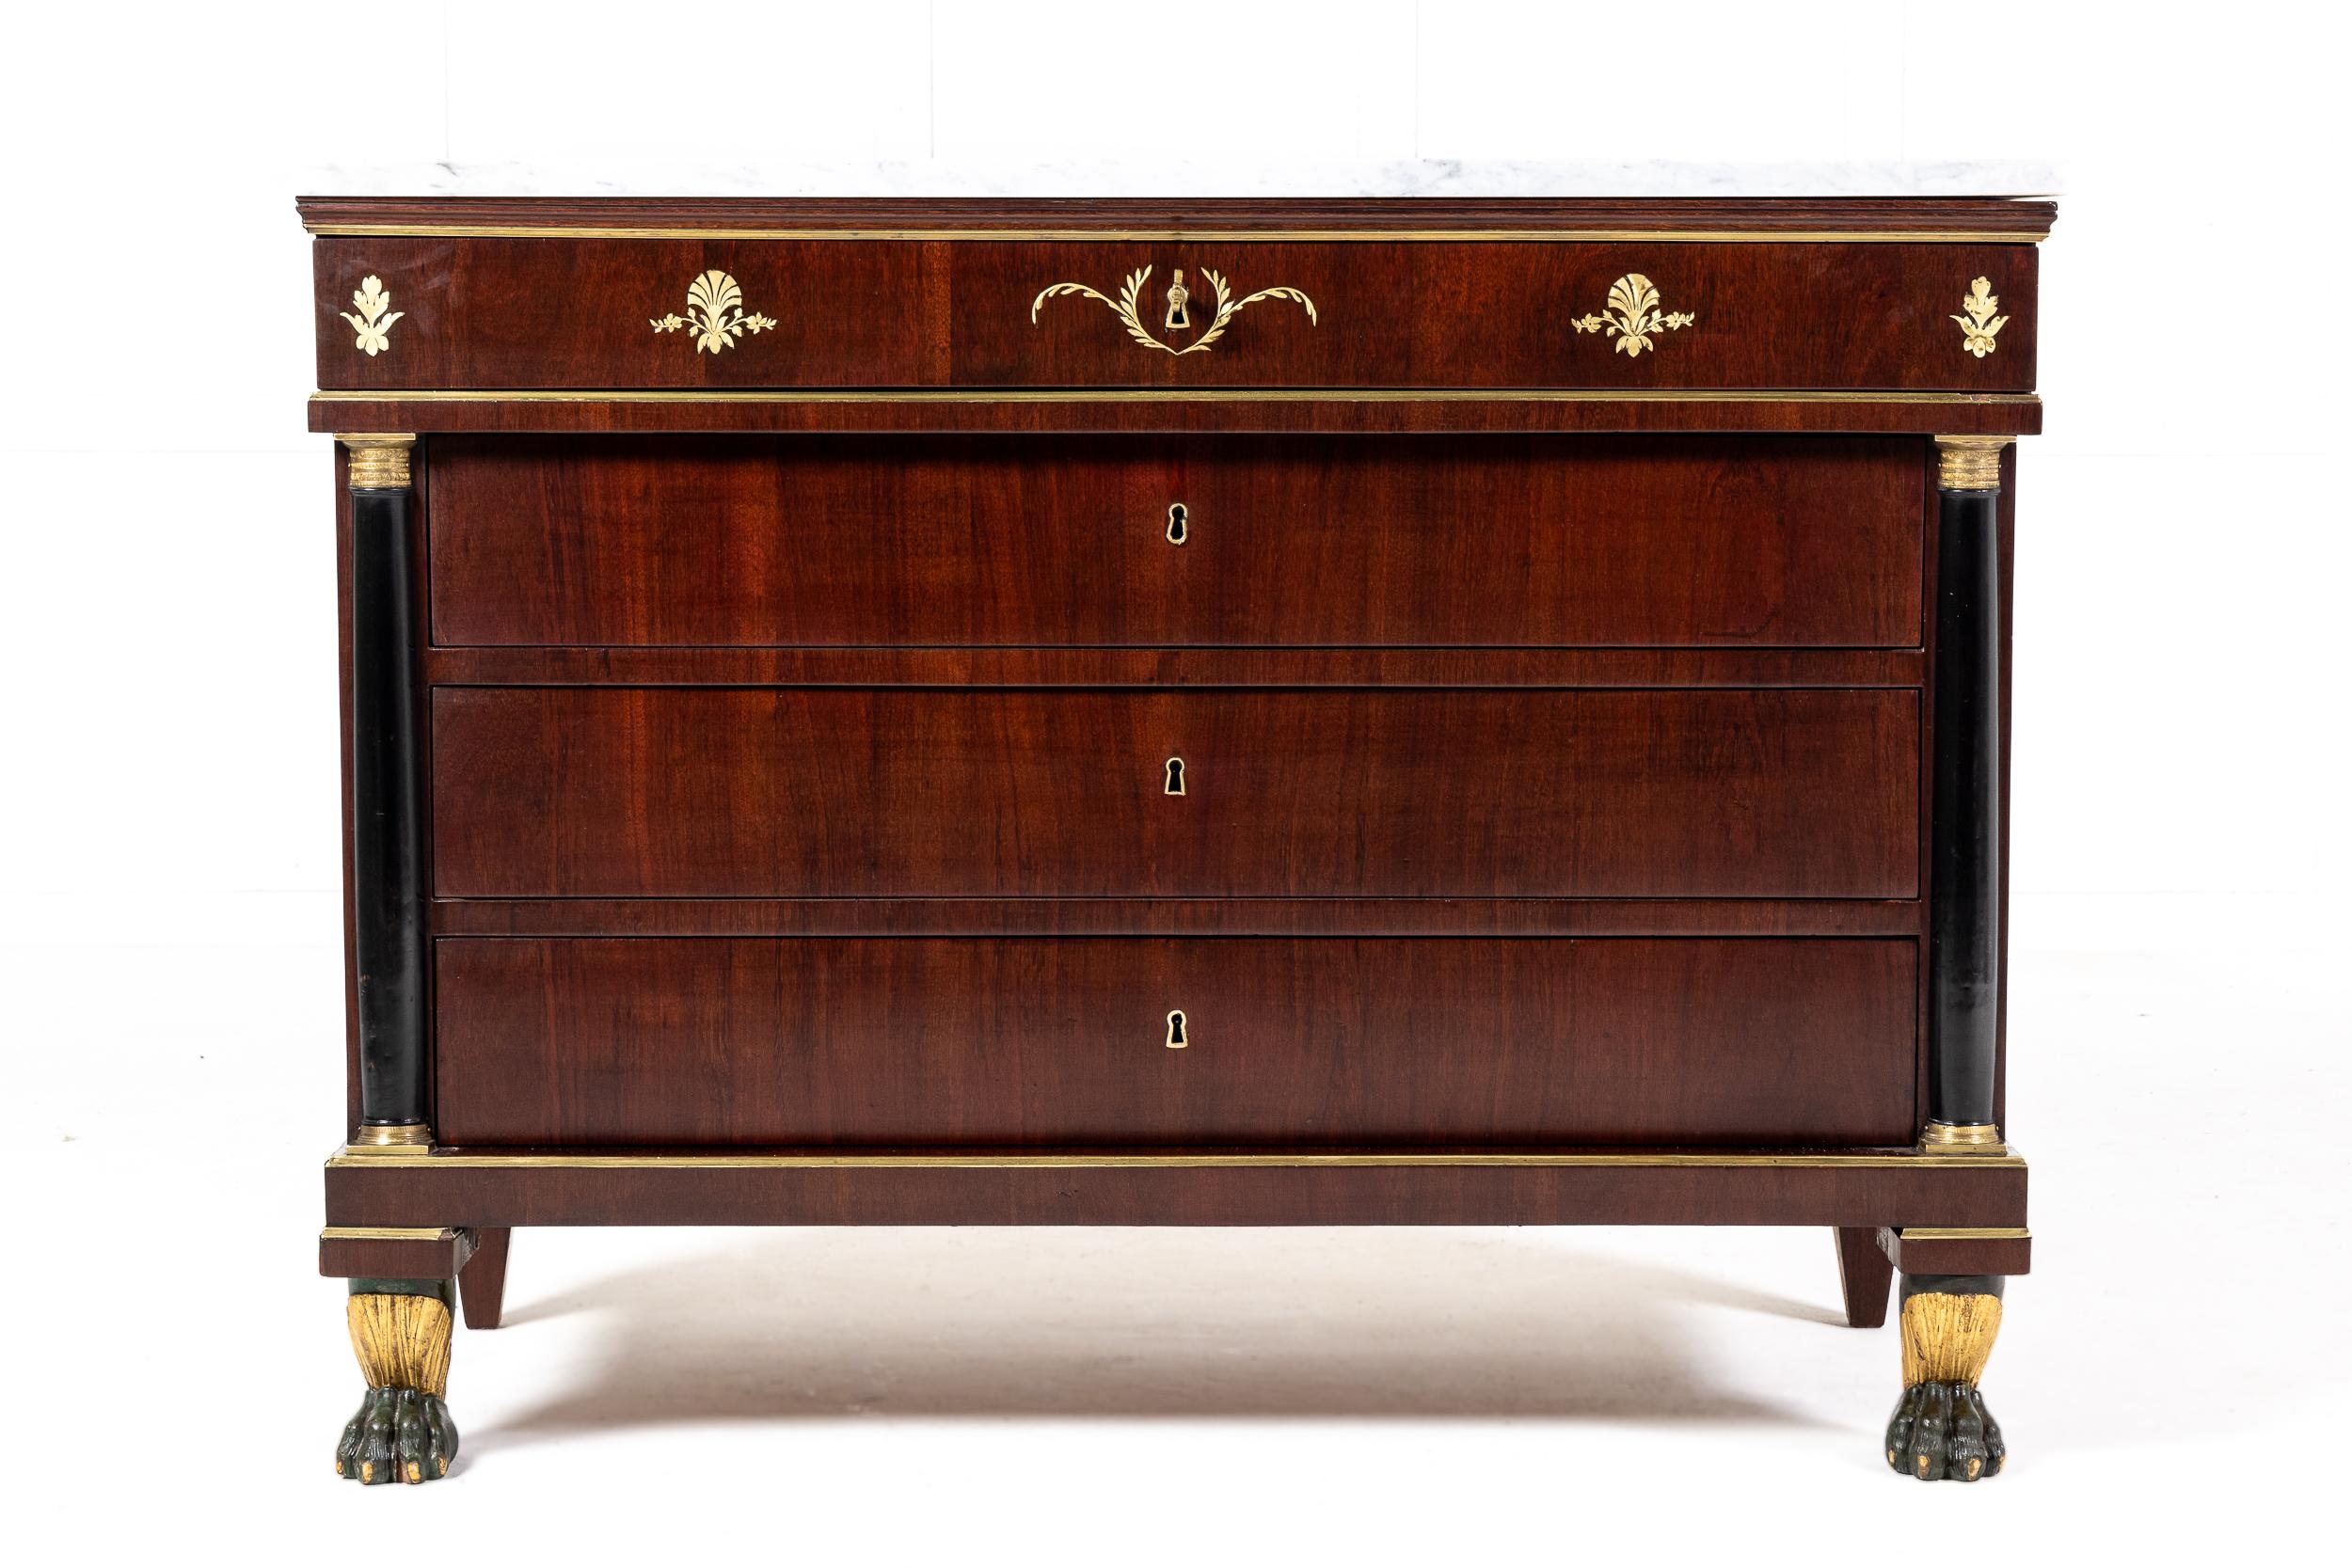 Pair of Italian Rosewood Inlaid 'Empire' Commodes C1820 For Sale 3